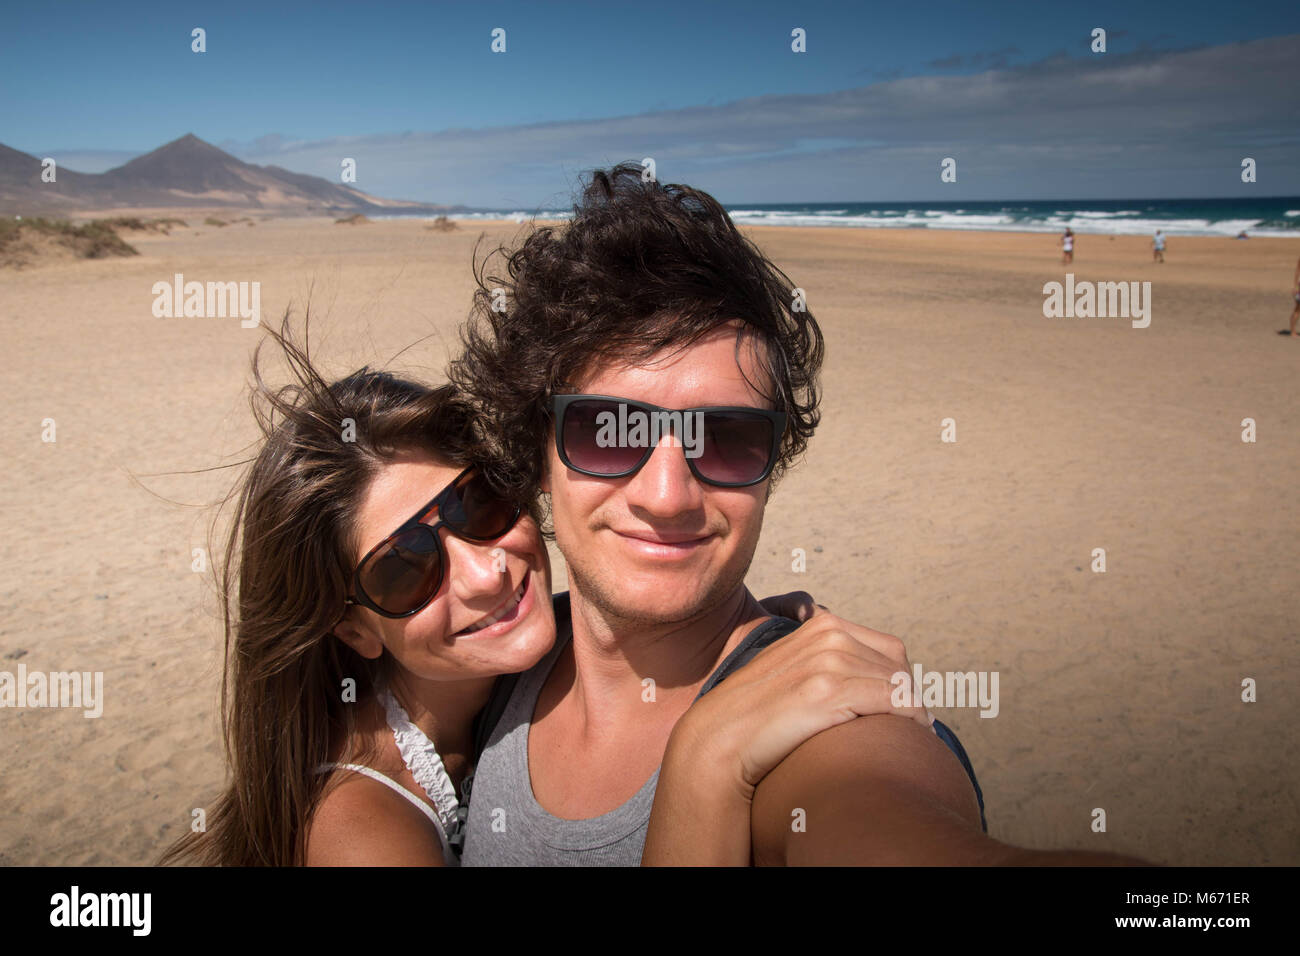 Happy embracing young couple portrait at the beach. Medium close-up with scenic background. Fuerteventura, Canary islands, Spain. Stock Photo